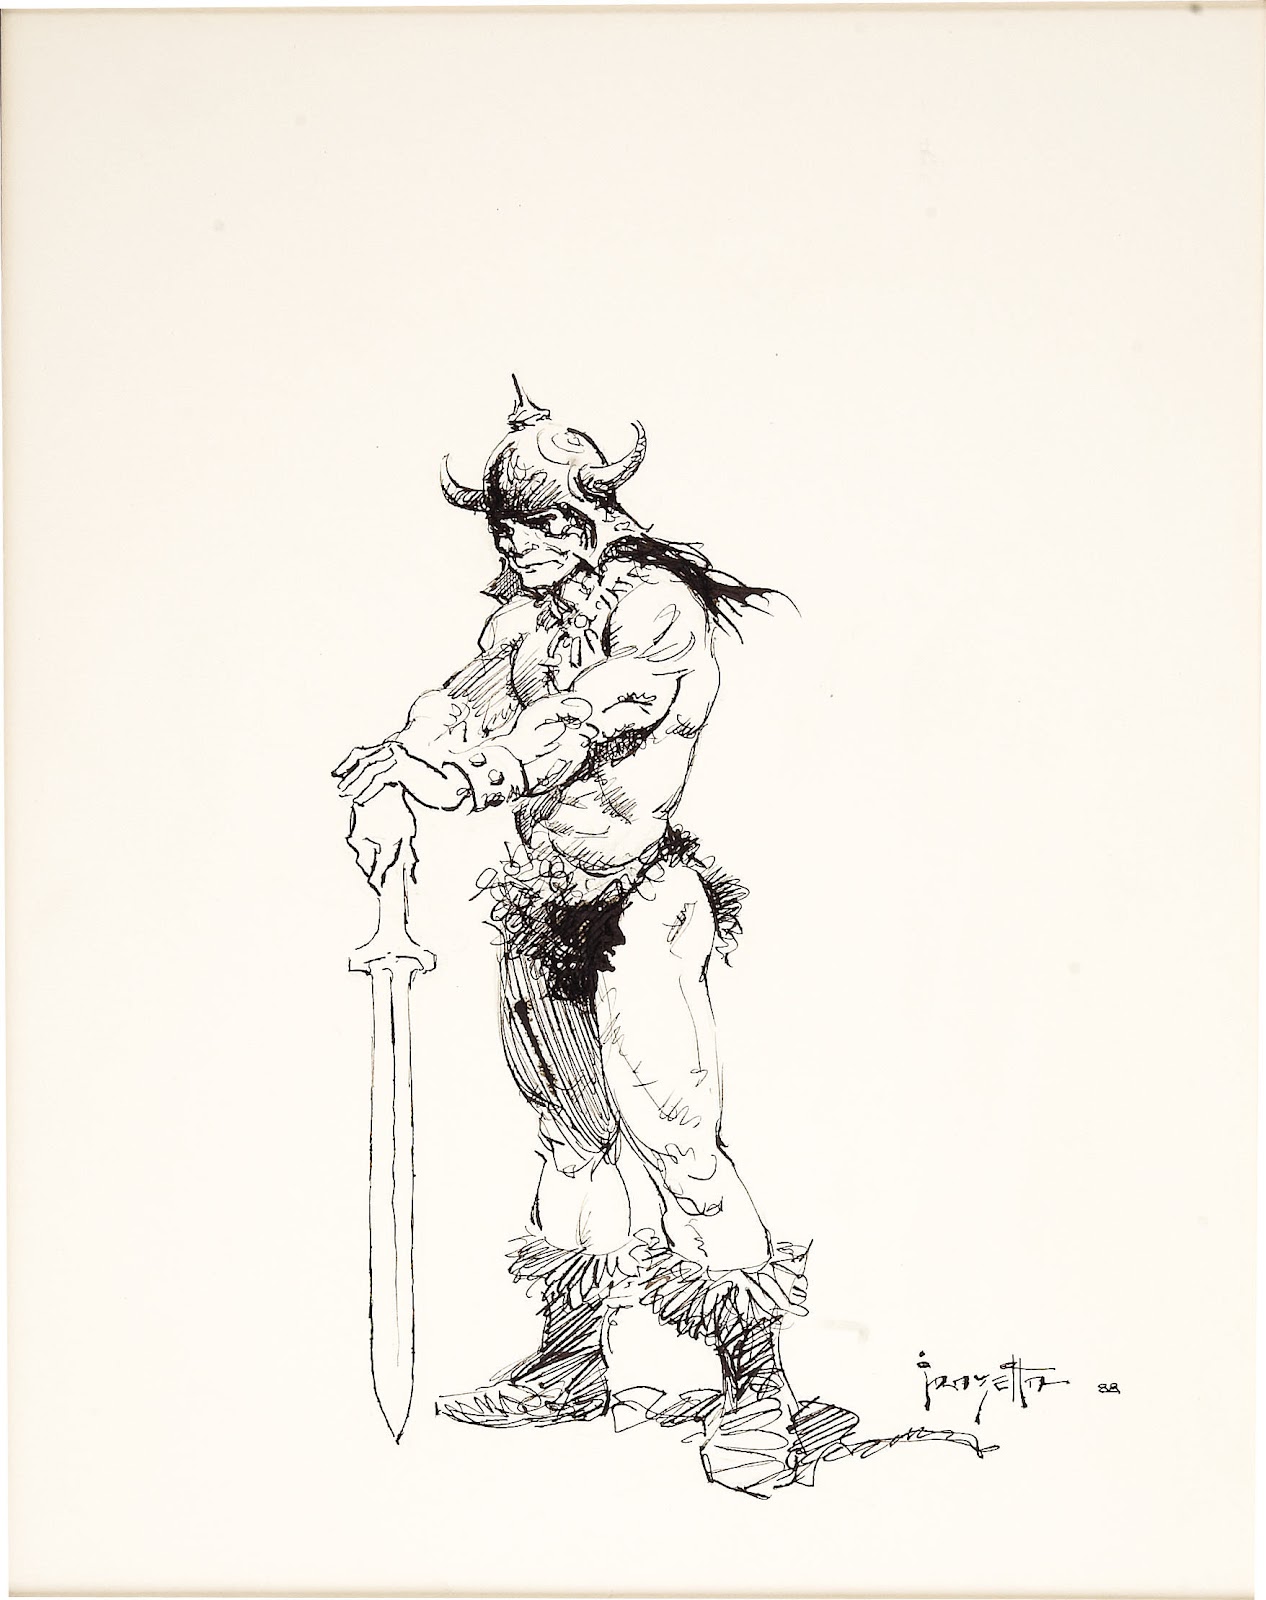 Cap'n's Comics: Rogues In The House by Frank Frazetta